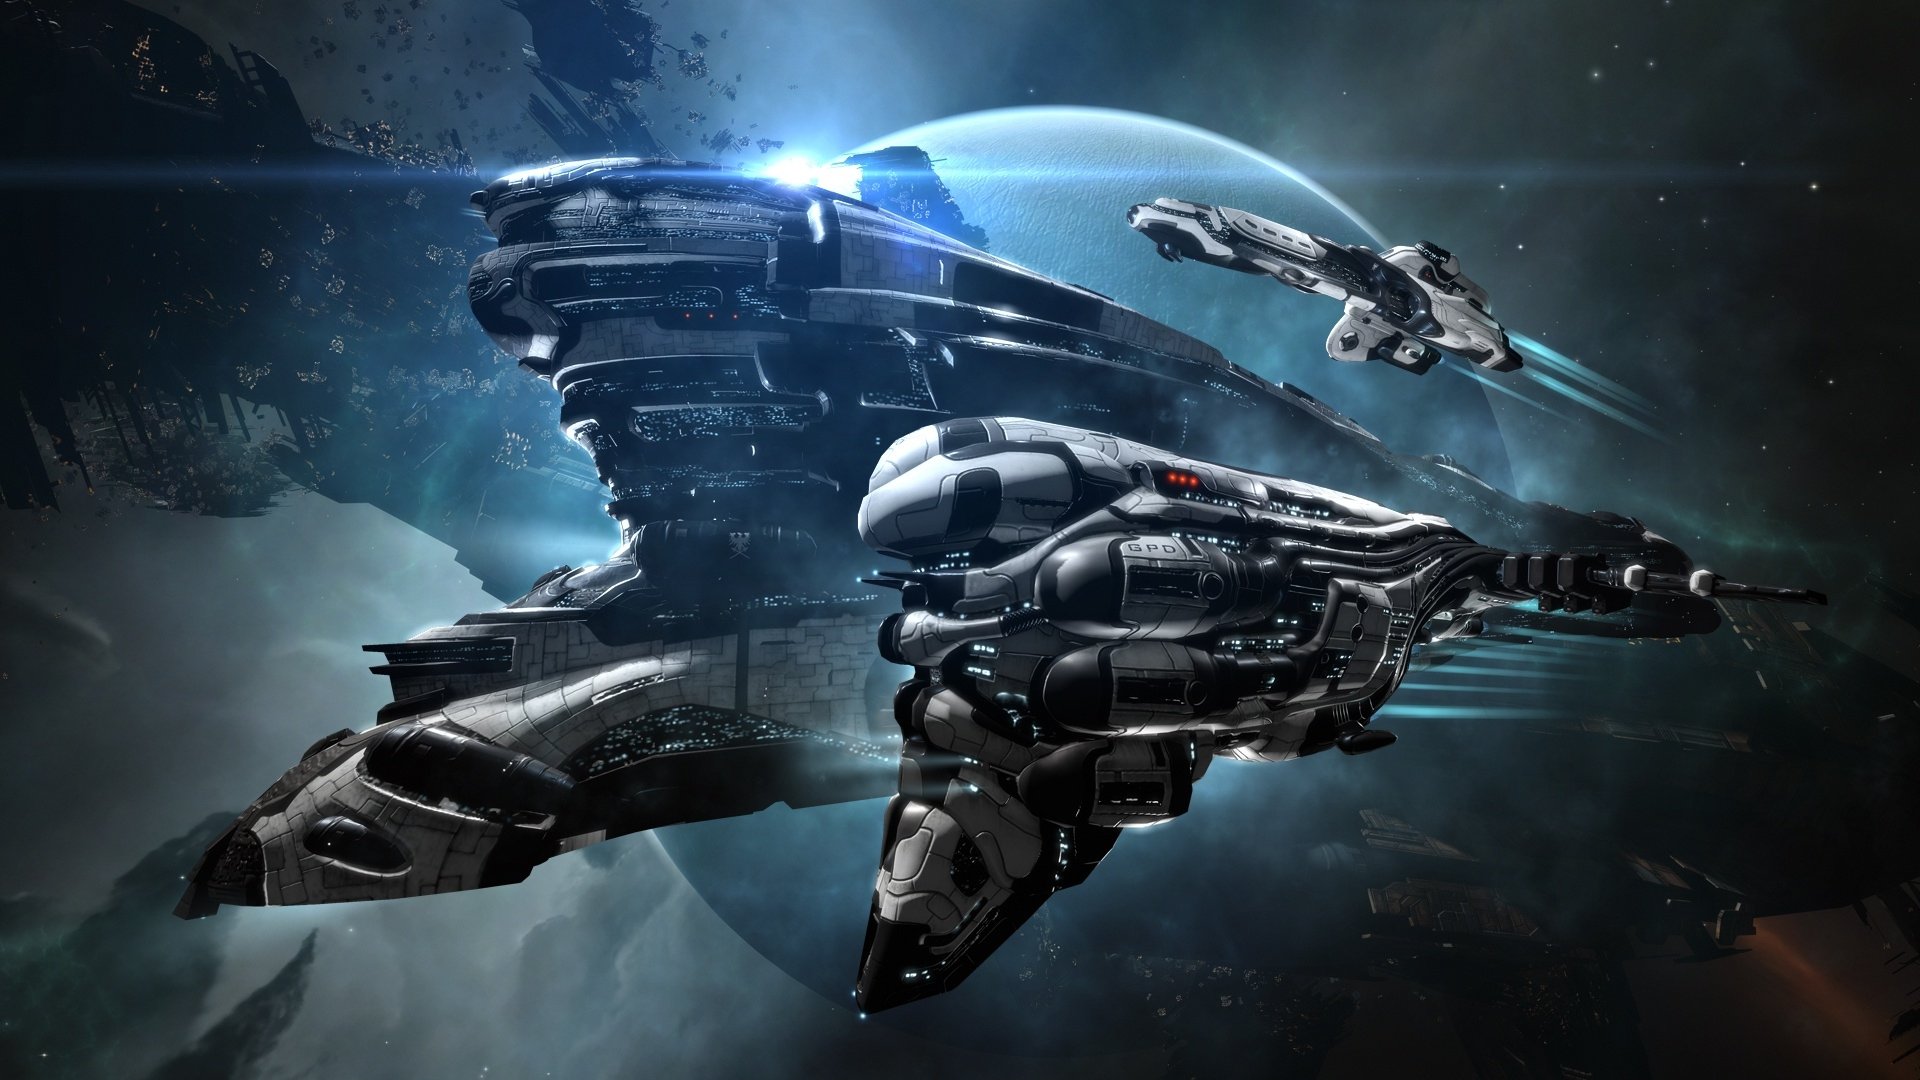 EVE Online HD Wallpaper | Background Image | 1920x1080